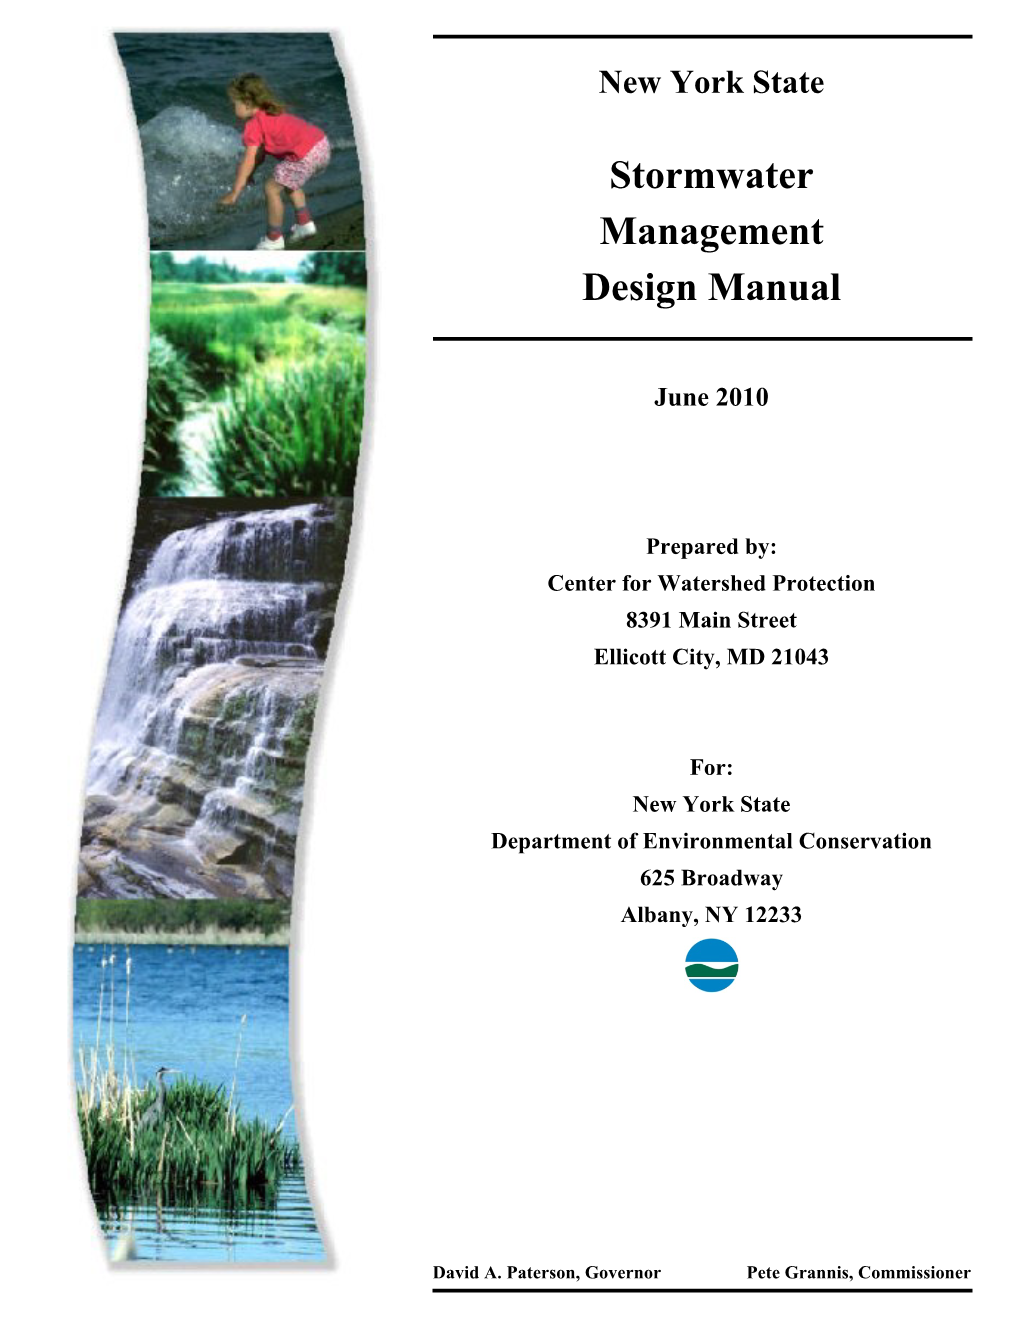 New York State Stormwater Management Design Manual